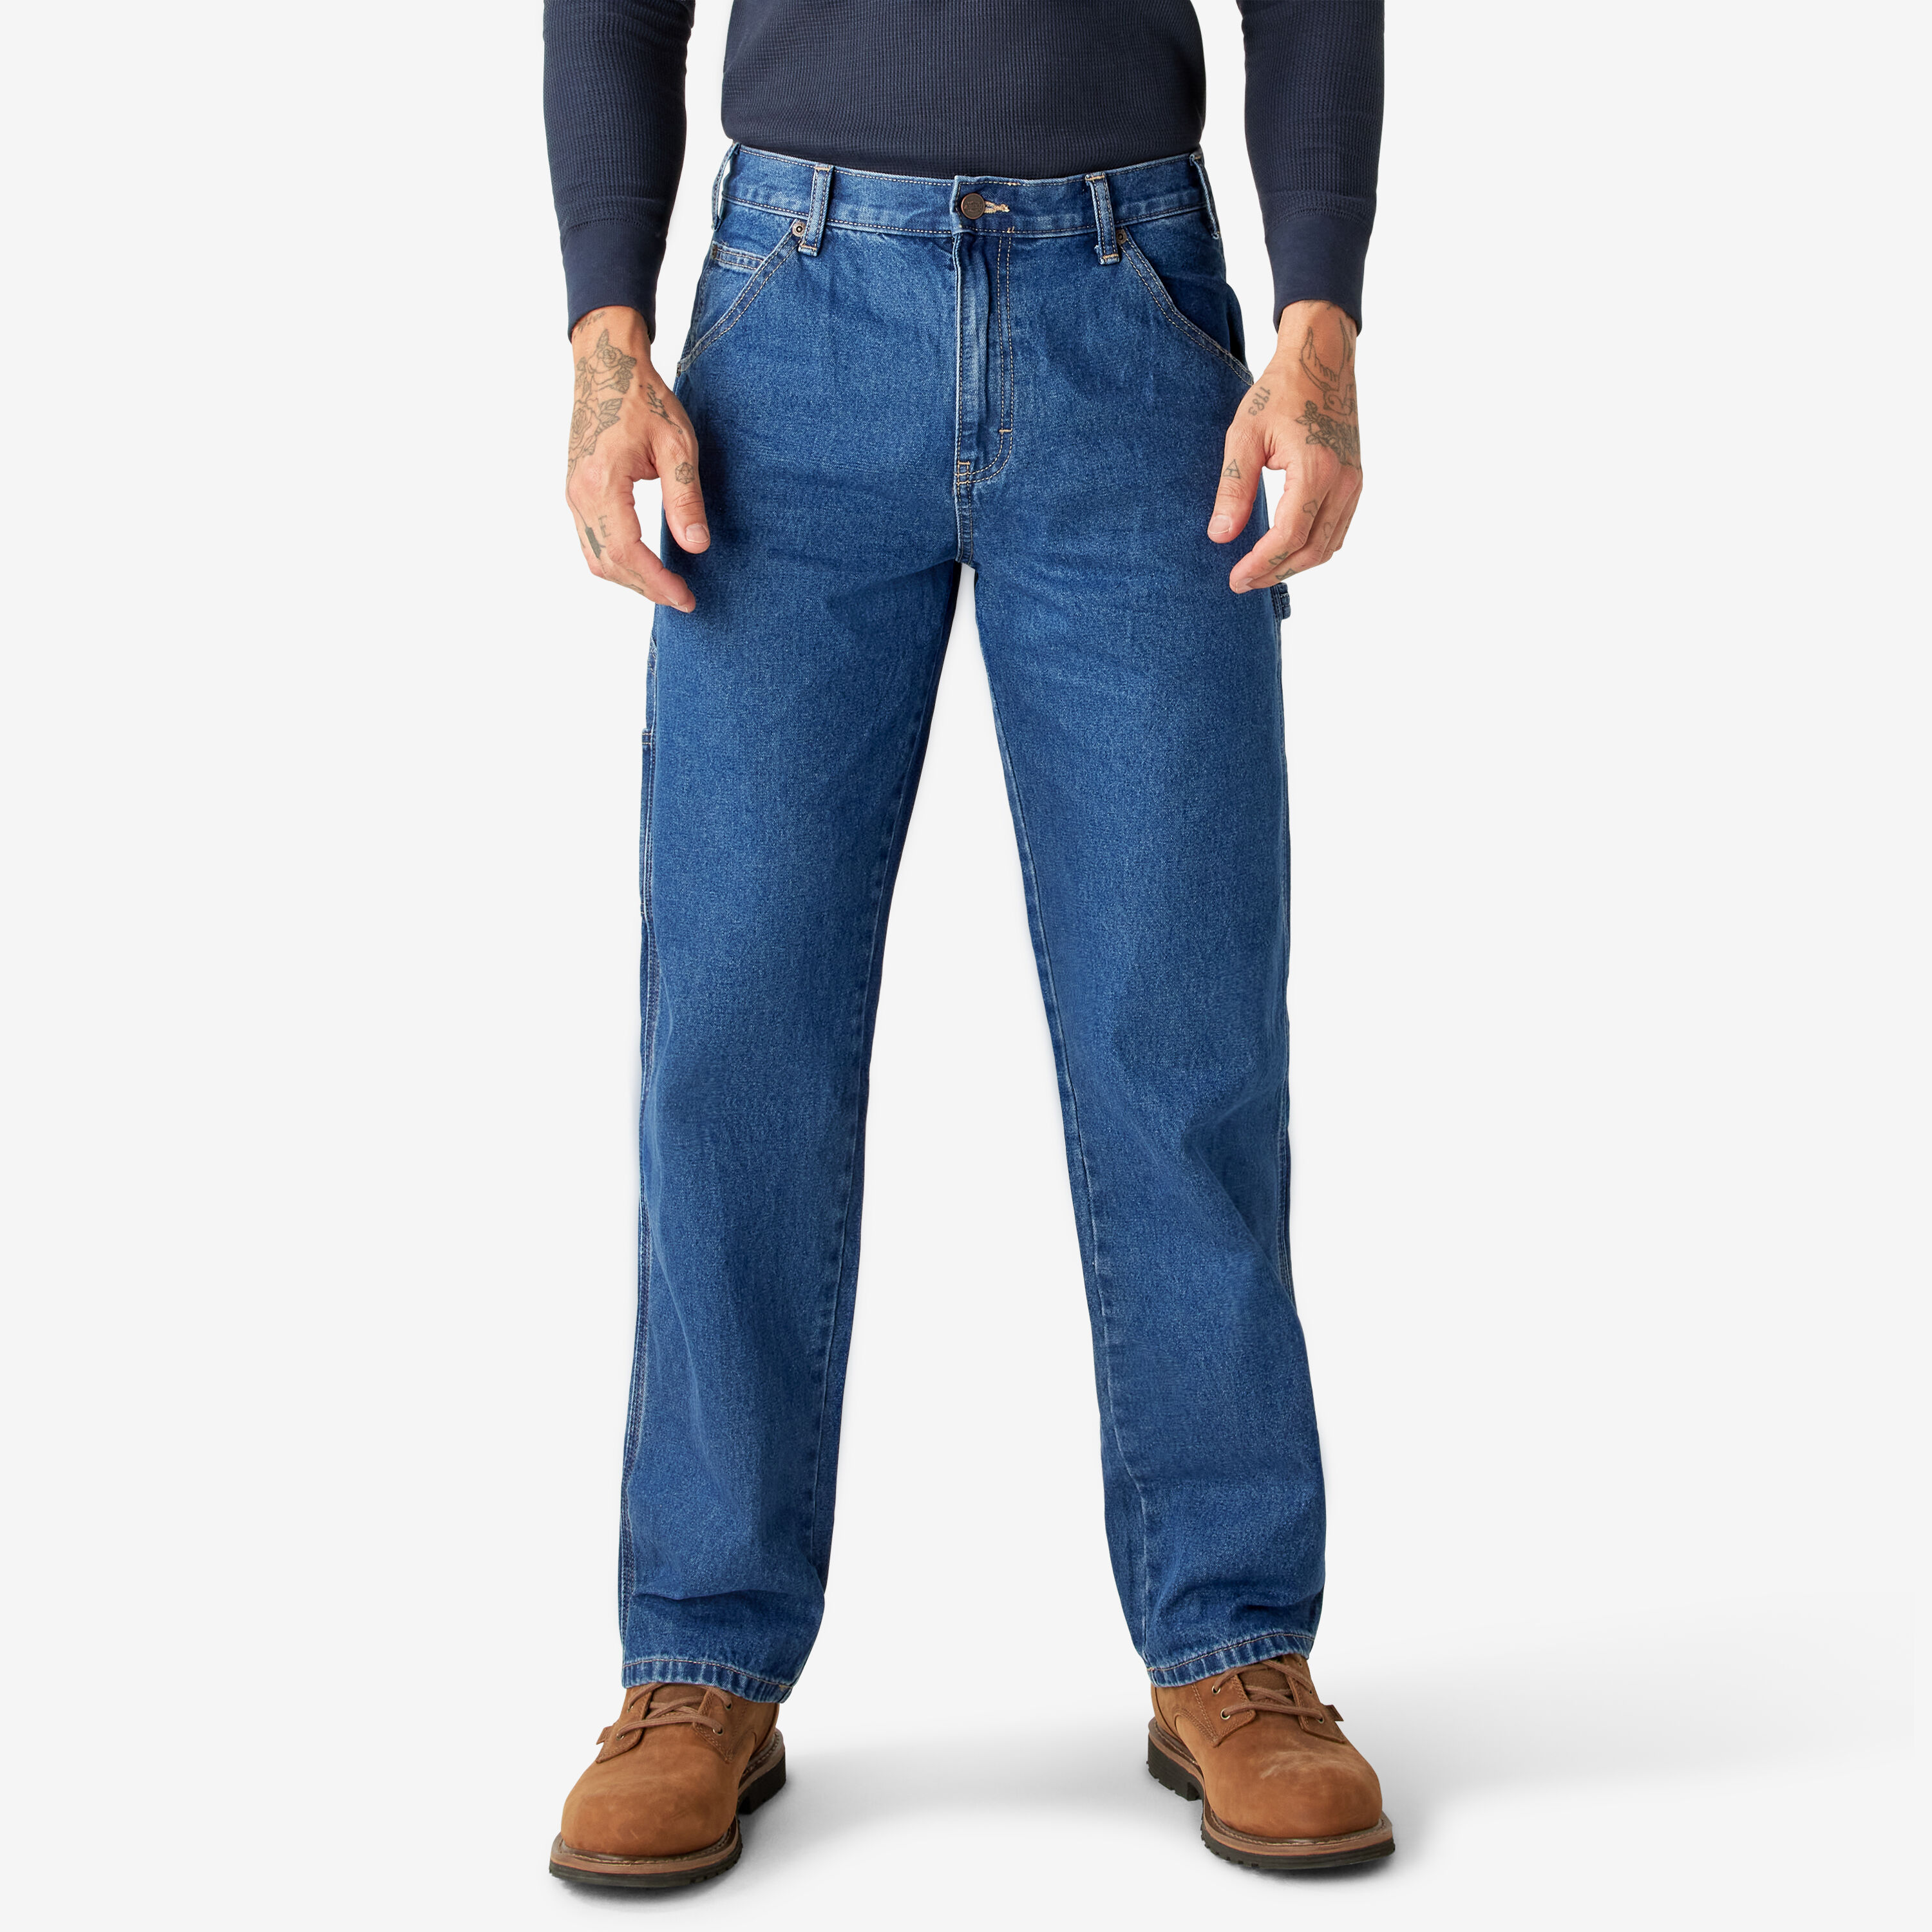 Men's Relaxed Fit Carpenter Jeans - Dickies US